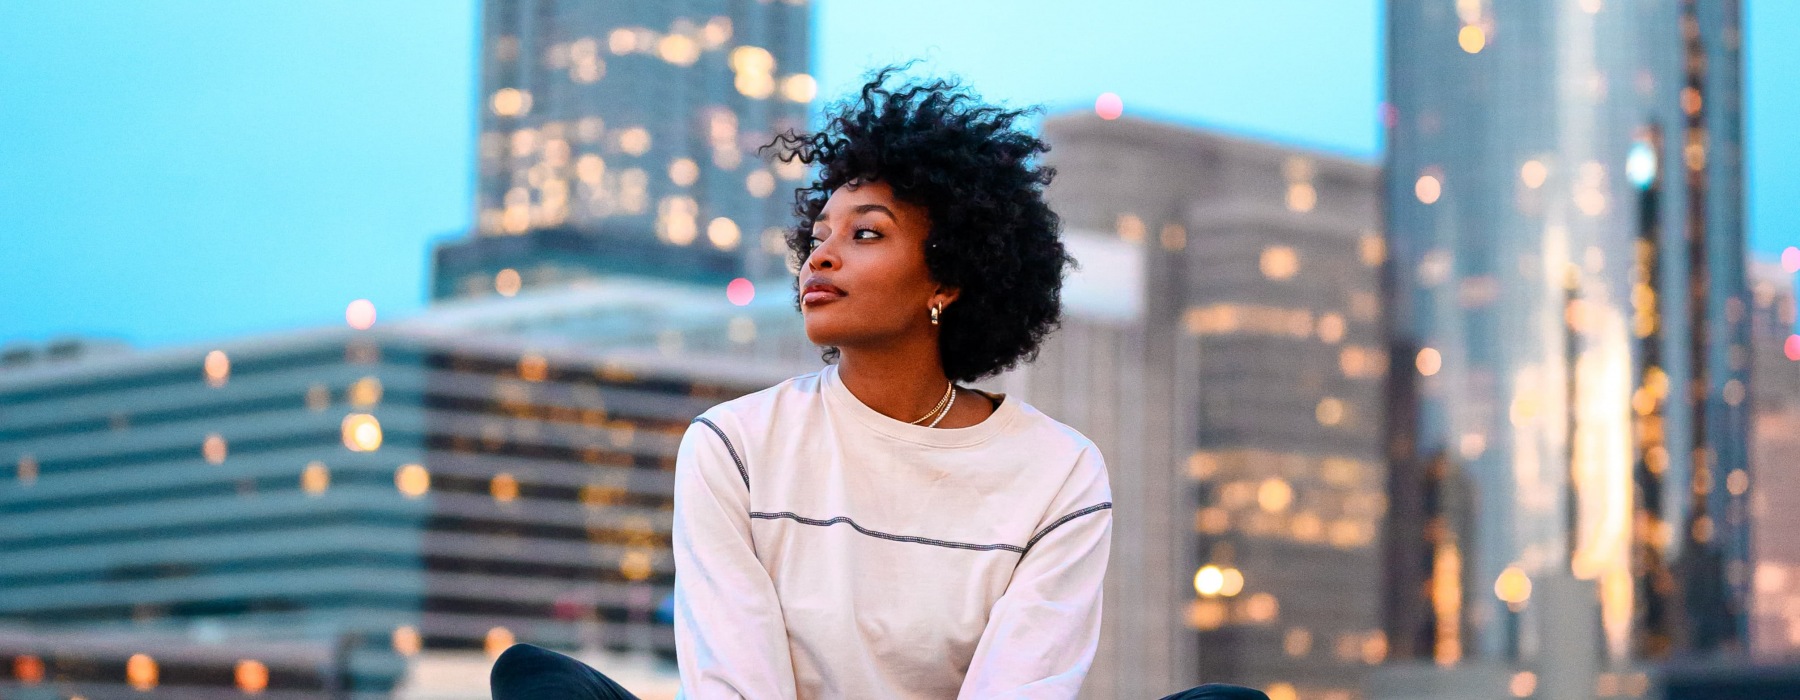 lifestyle image of a woman in front of a city skyline